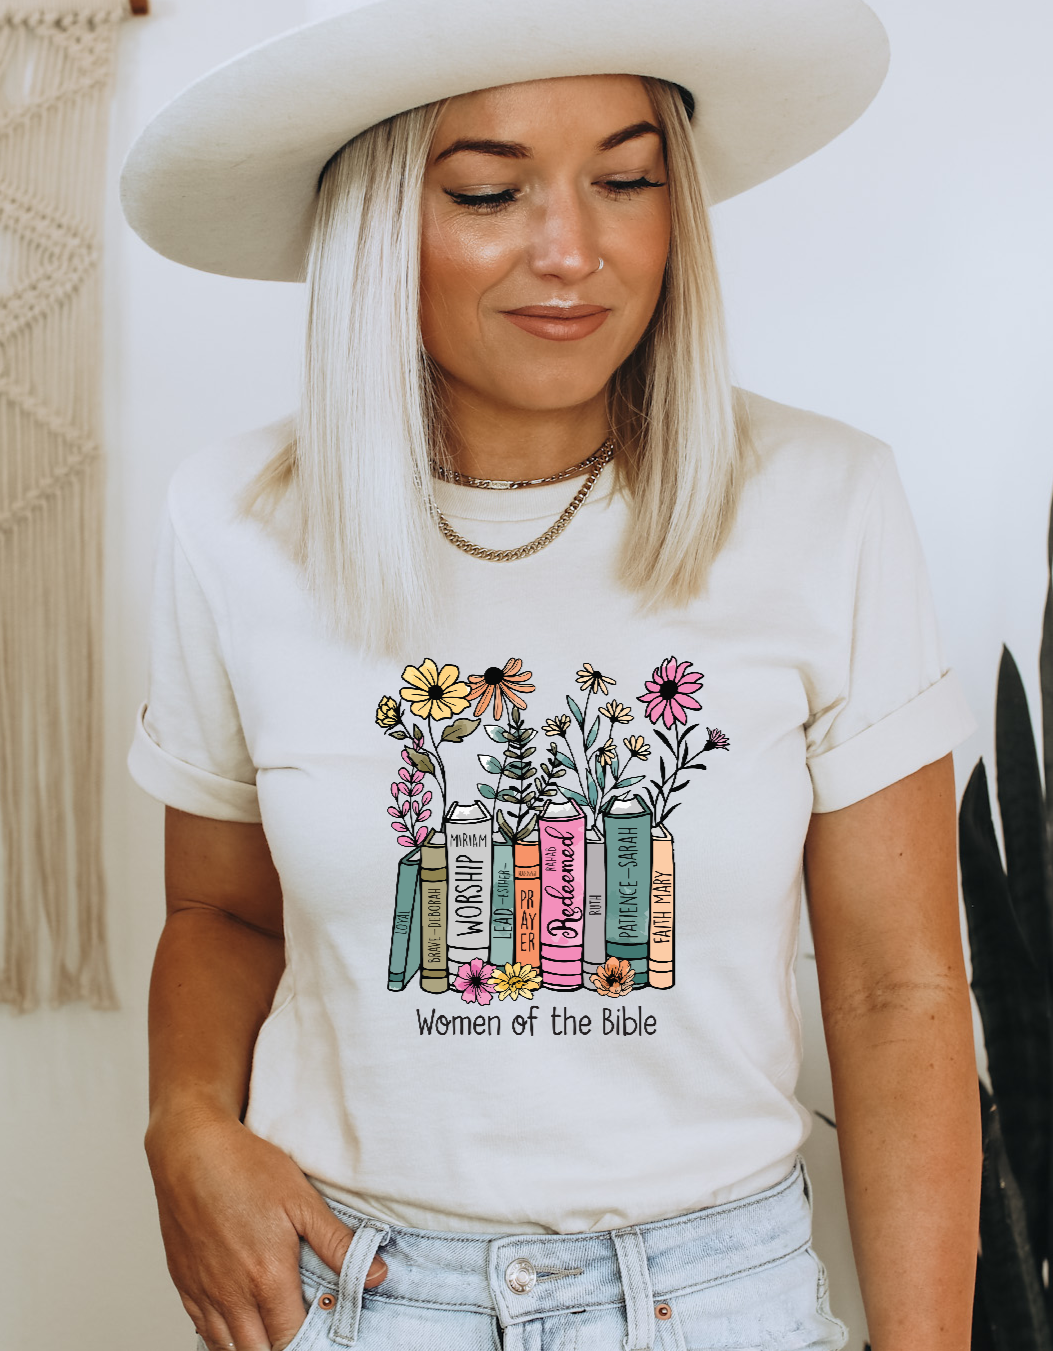 Women of the bible image with flowers on a white shirt - Rejoice In Creation LLC